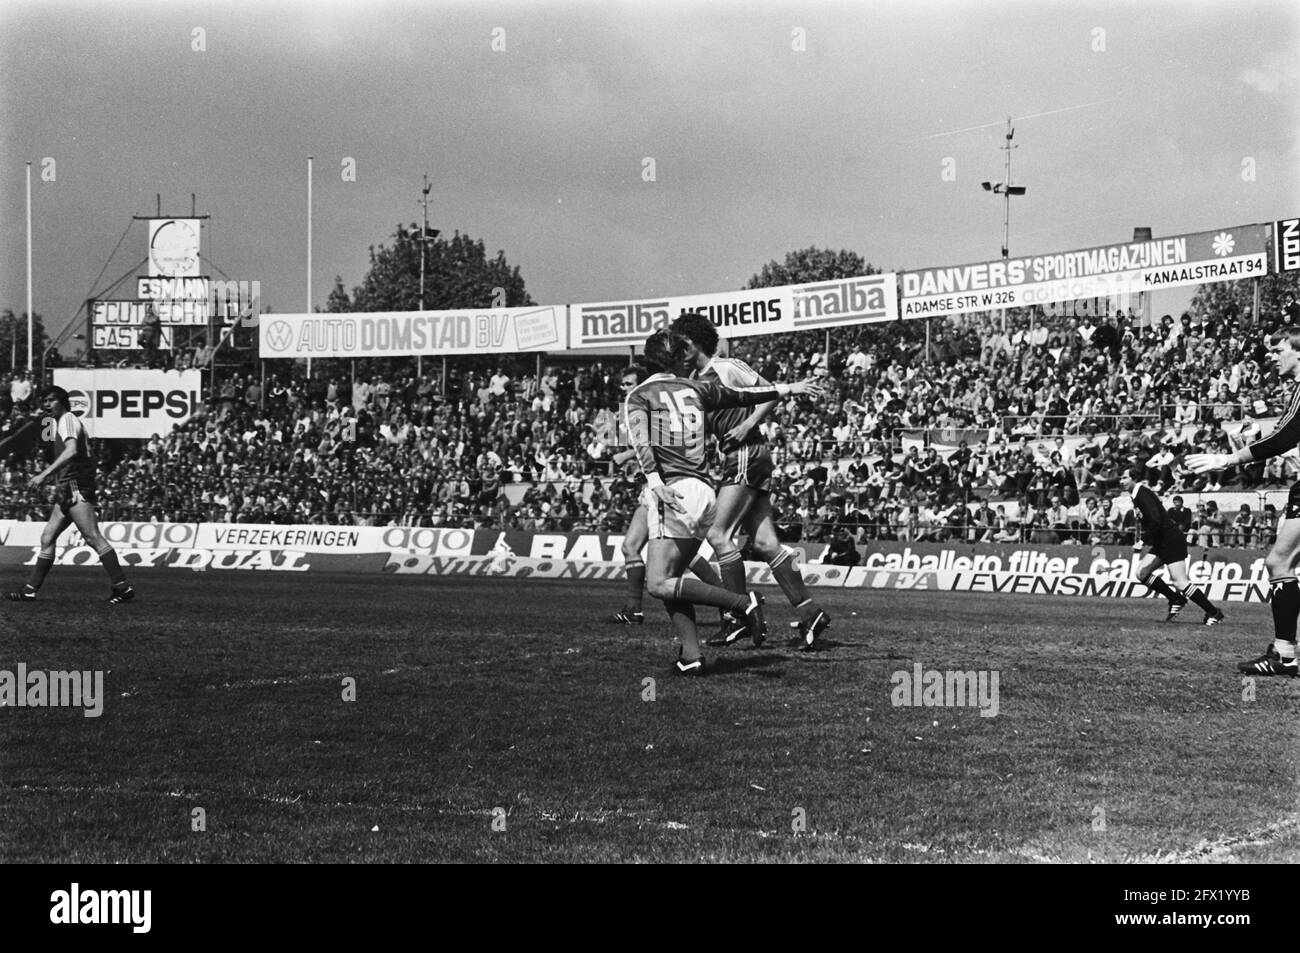 Last match in stadium Galgenwaard in Utrecht, FC Utrecht against PSV, De Kruyk of Utrecht with the ball, No. 15 of Utrecht, Carbo looks on, 20 April 1981, sports, soccer, The Netherlands, 20th century press agency photo, news to remember, documentary, historic photography 1945-1990, visual stories, human history of the Twentieth Century, capturing moments in time Stock Photo